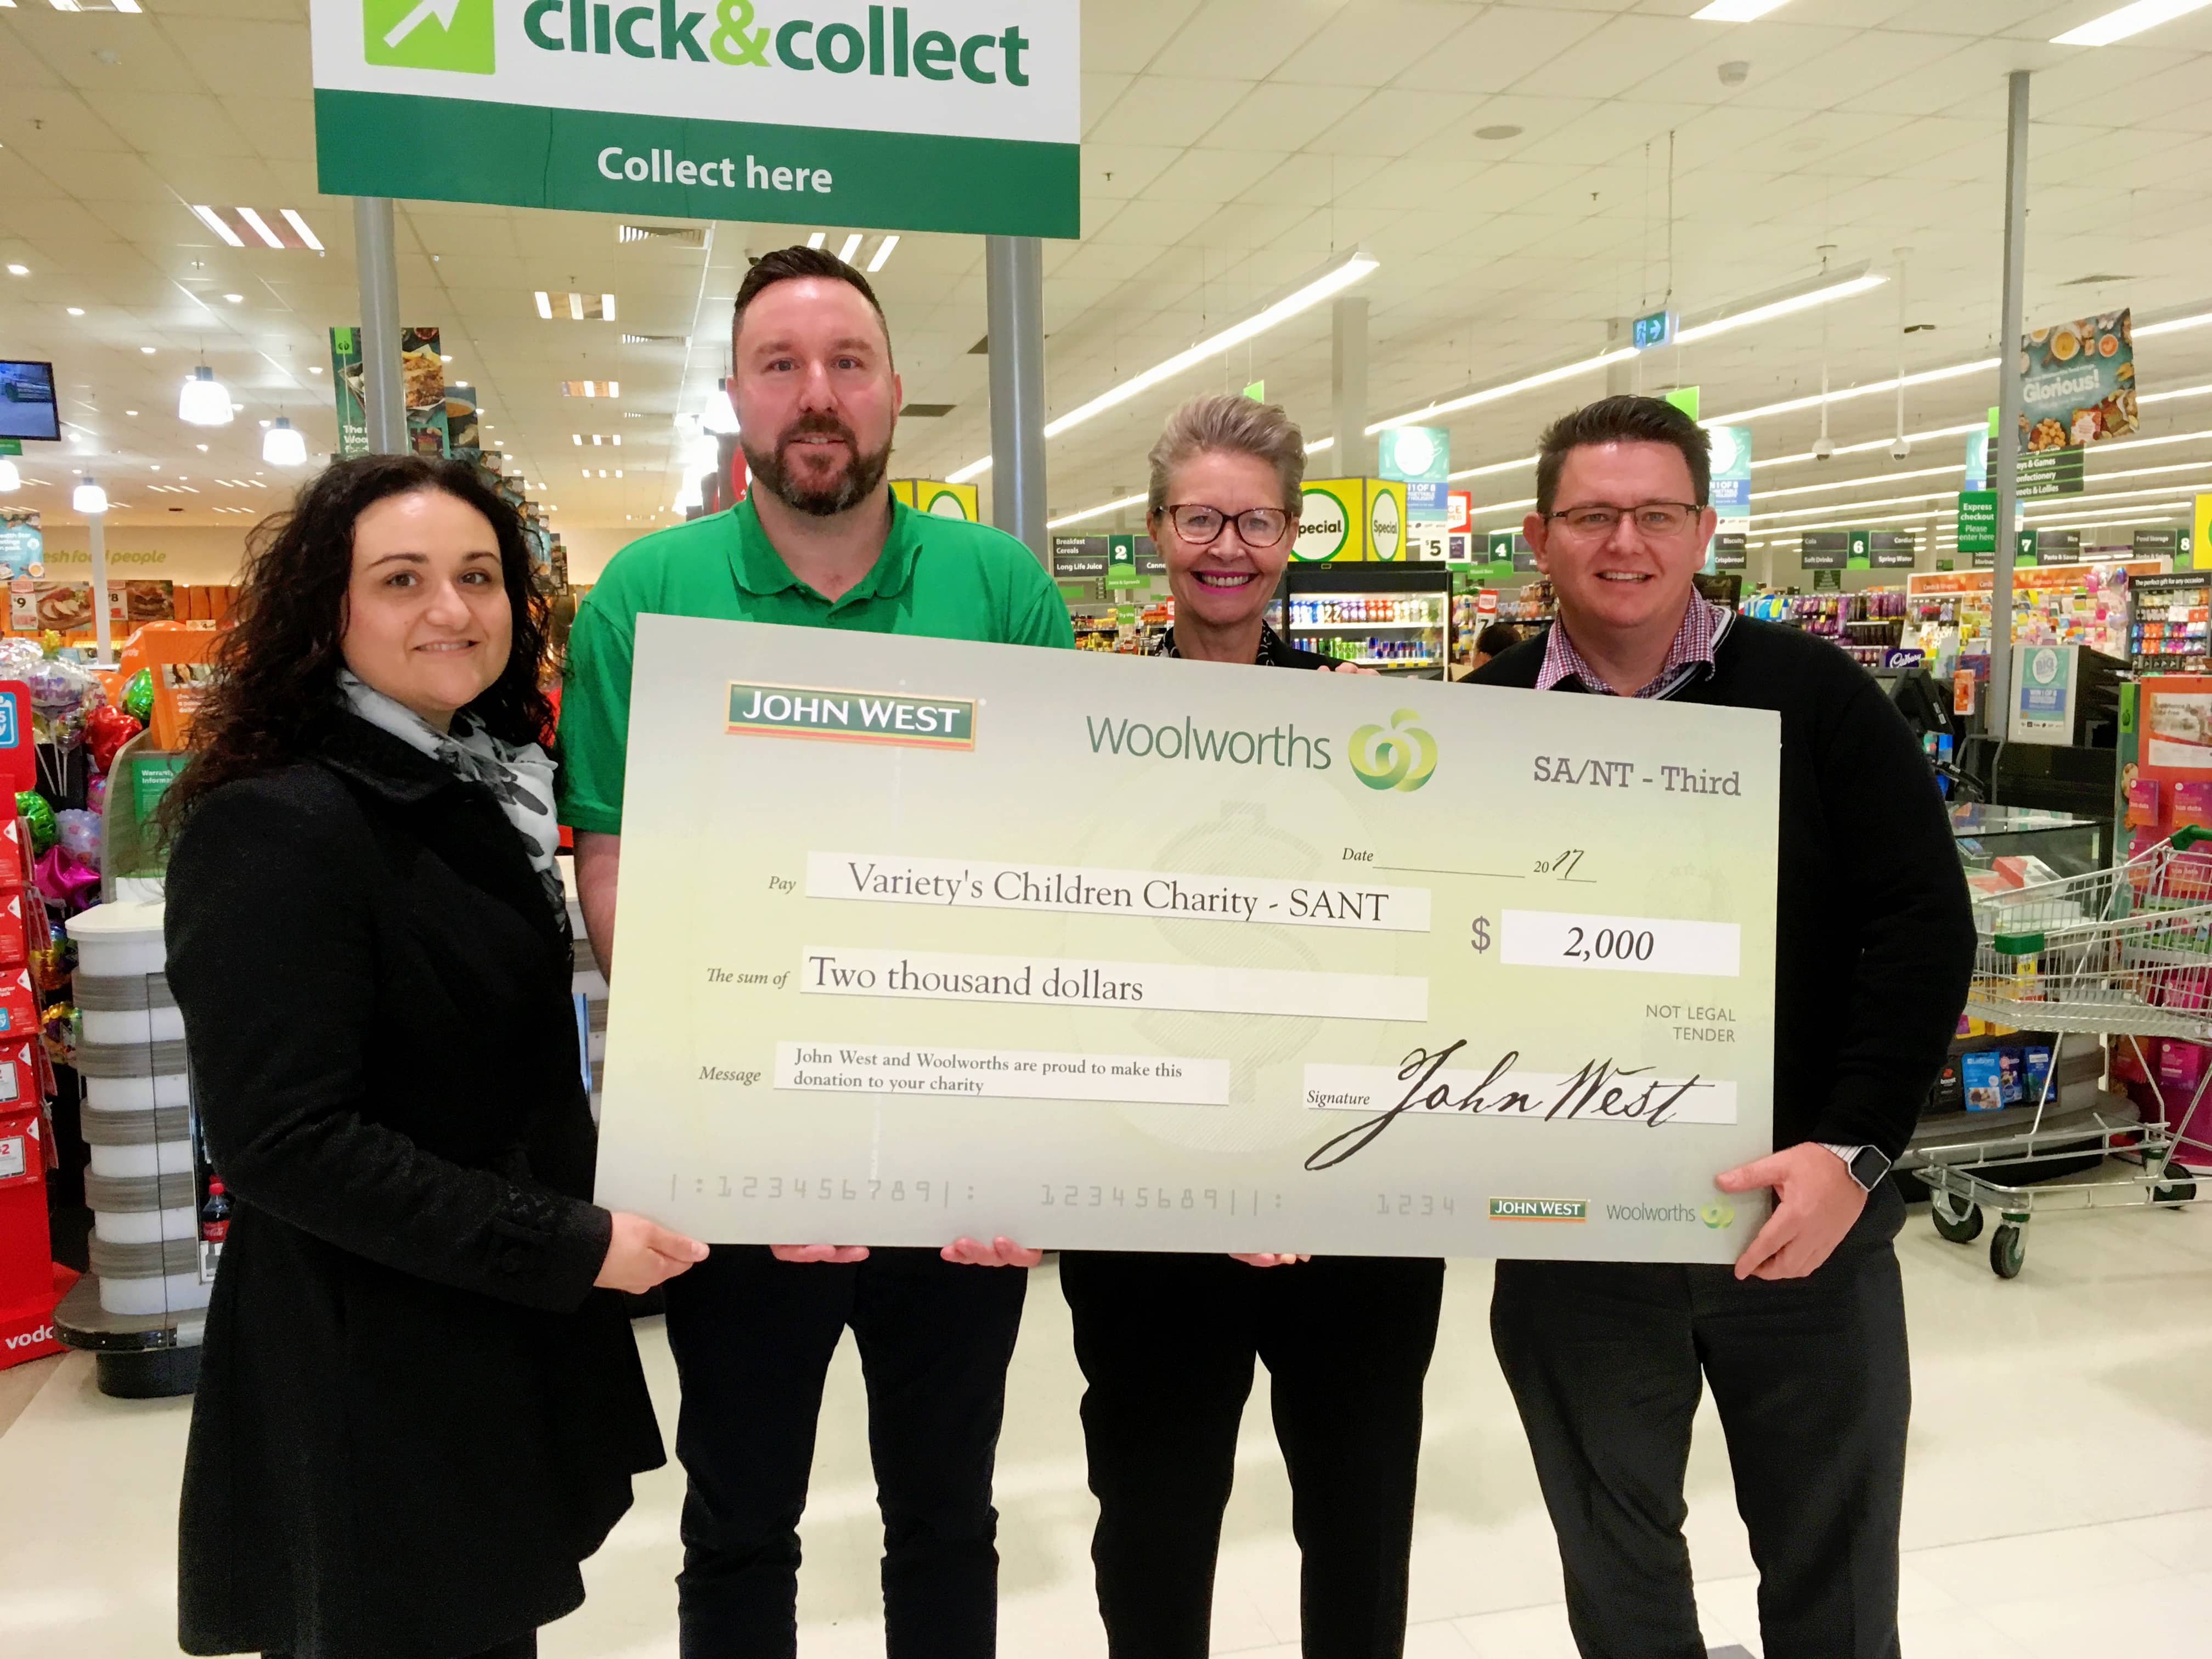 Woolworths and John West support Variety and children in the community